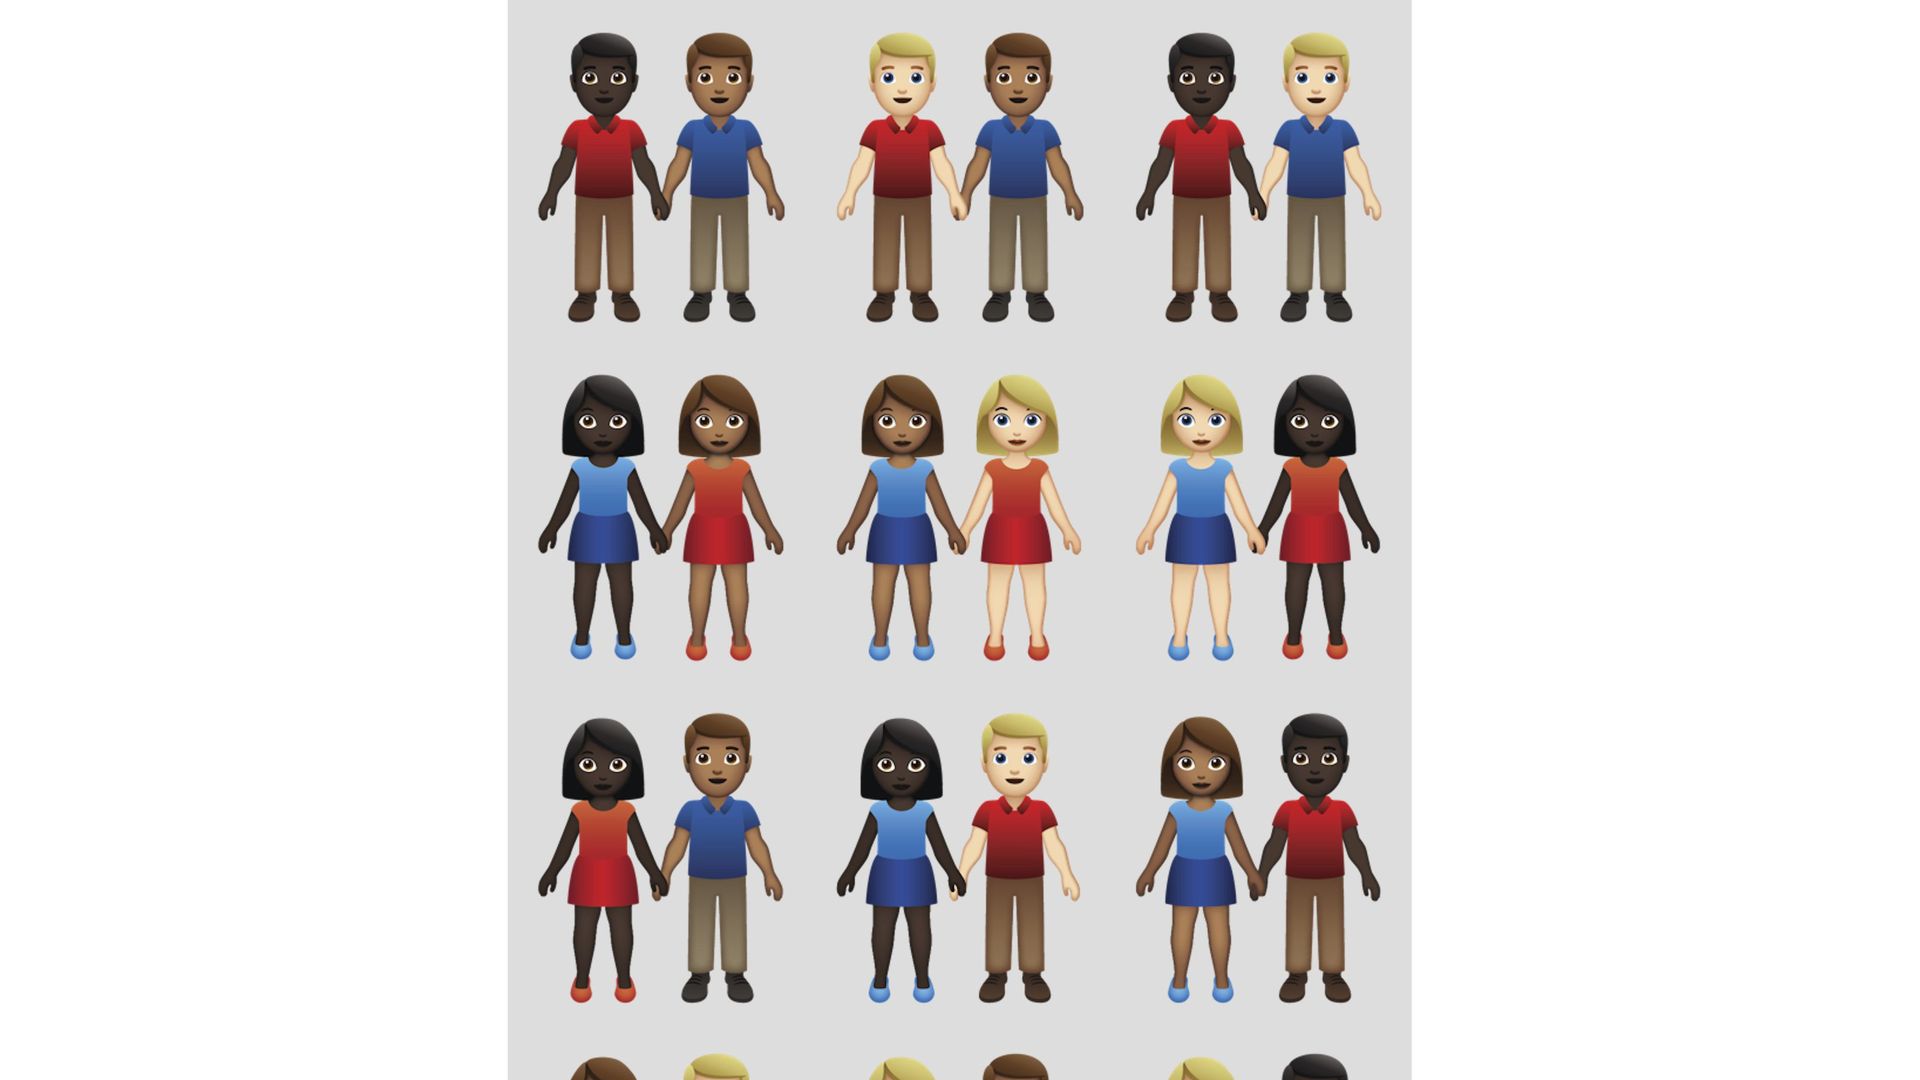 emojis couples of different skin tones holding hands.